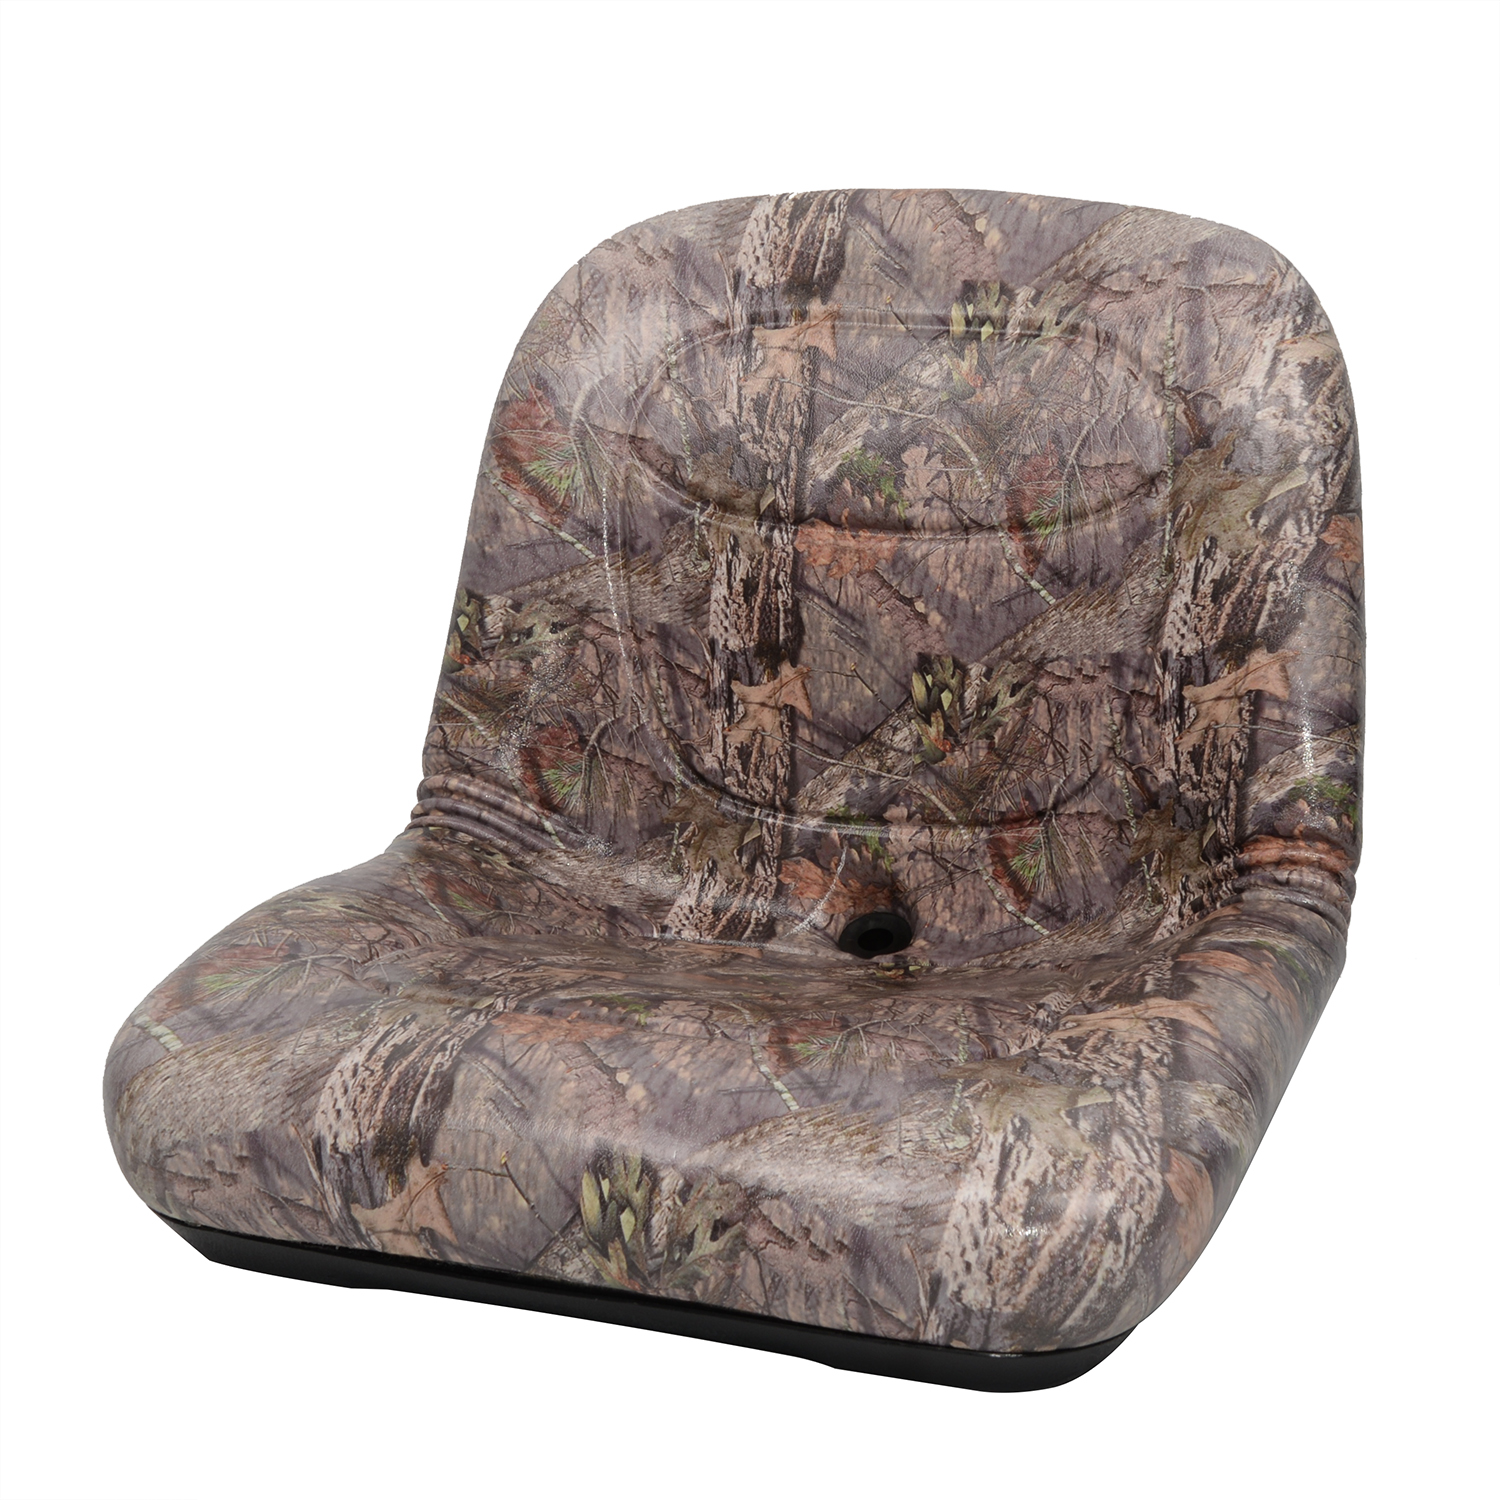 New Arrival Mossy Oak Camouflage High Back Seat Fits John Deere Tractors 4400 4410 4500 4510 Featured Image